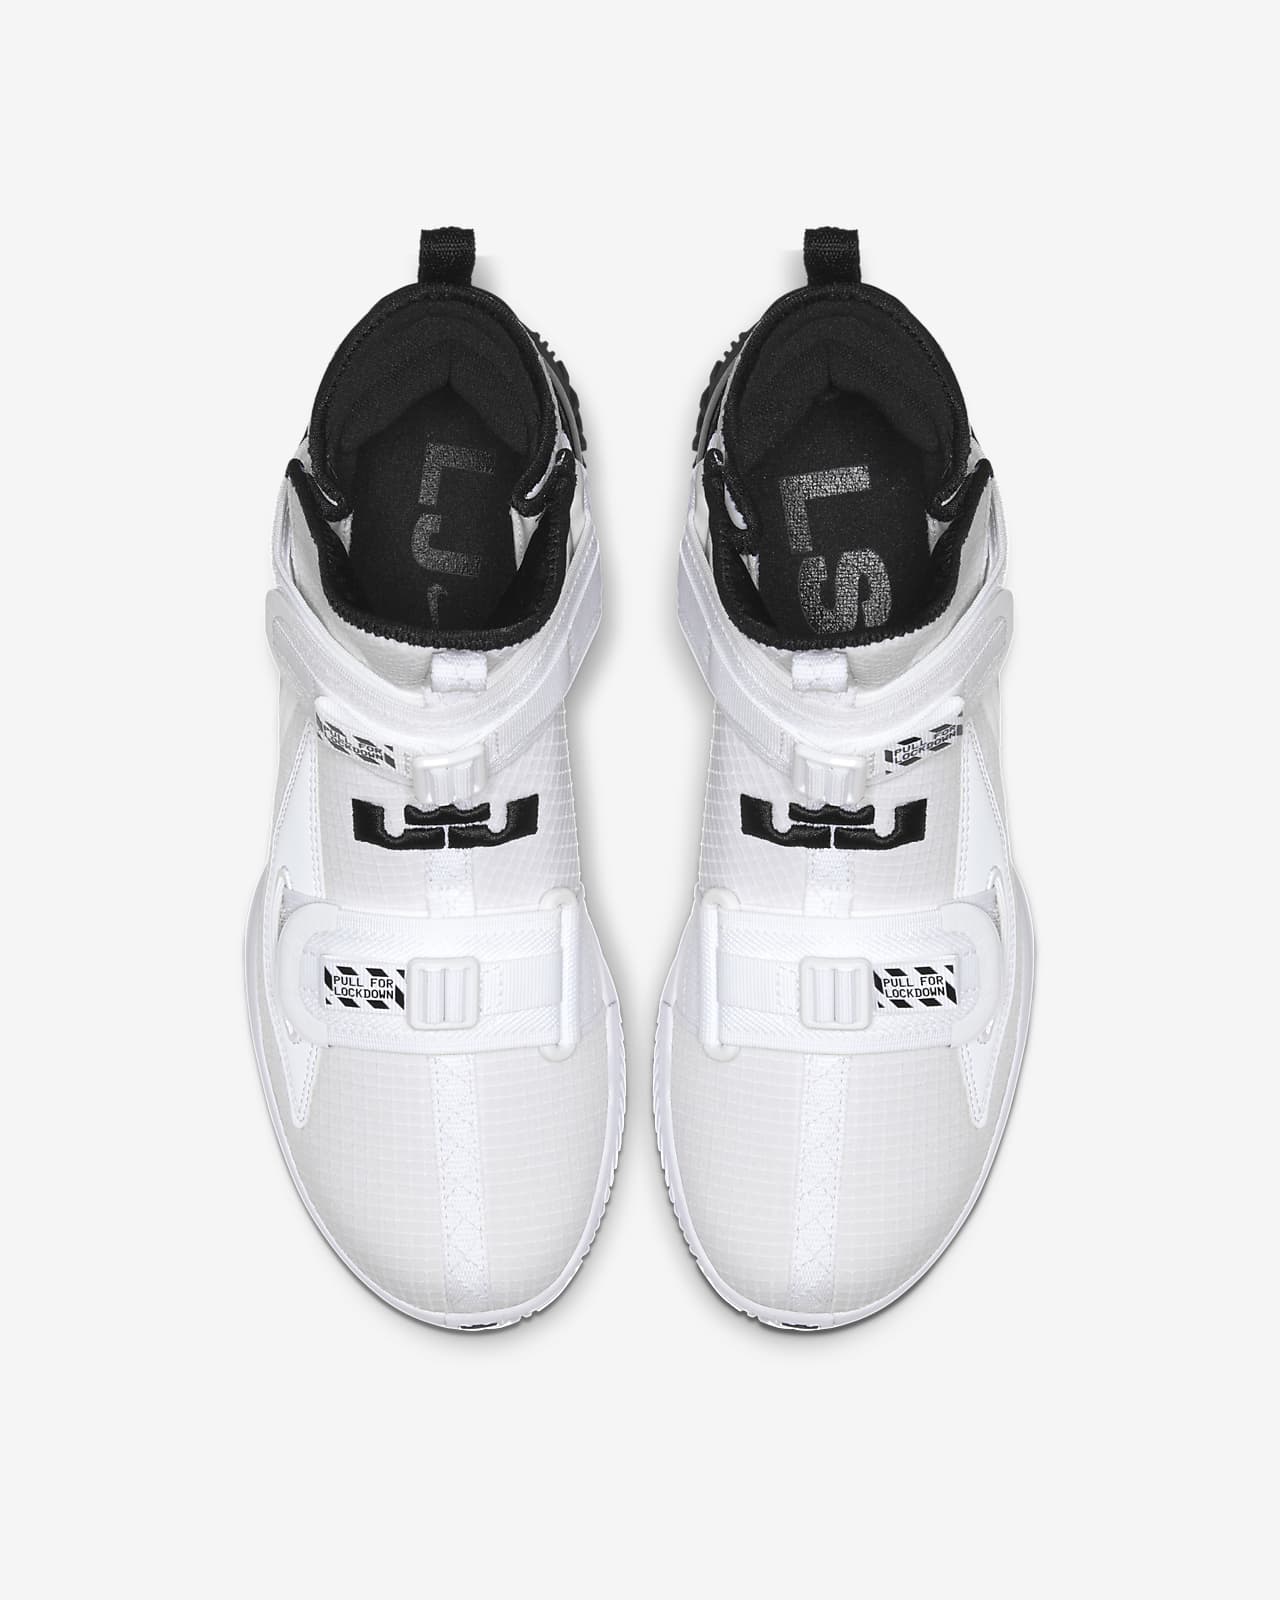 lebron soldier 13 black and white